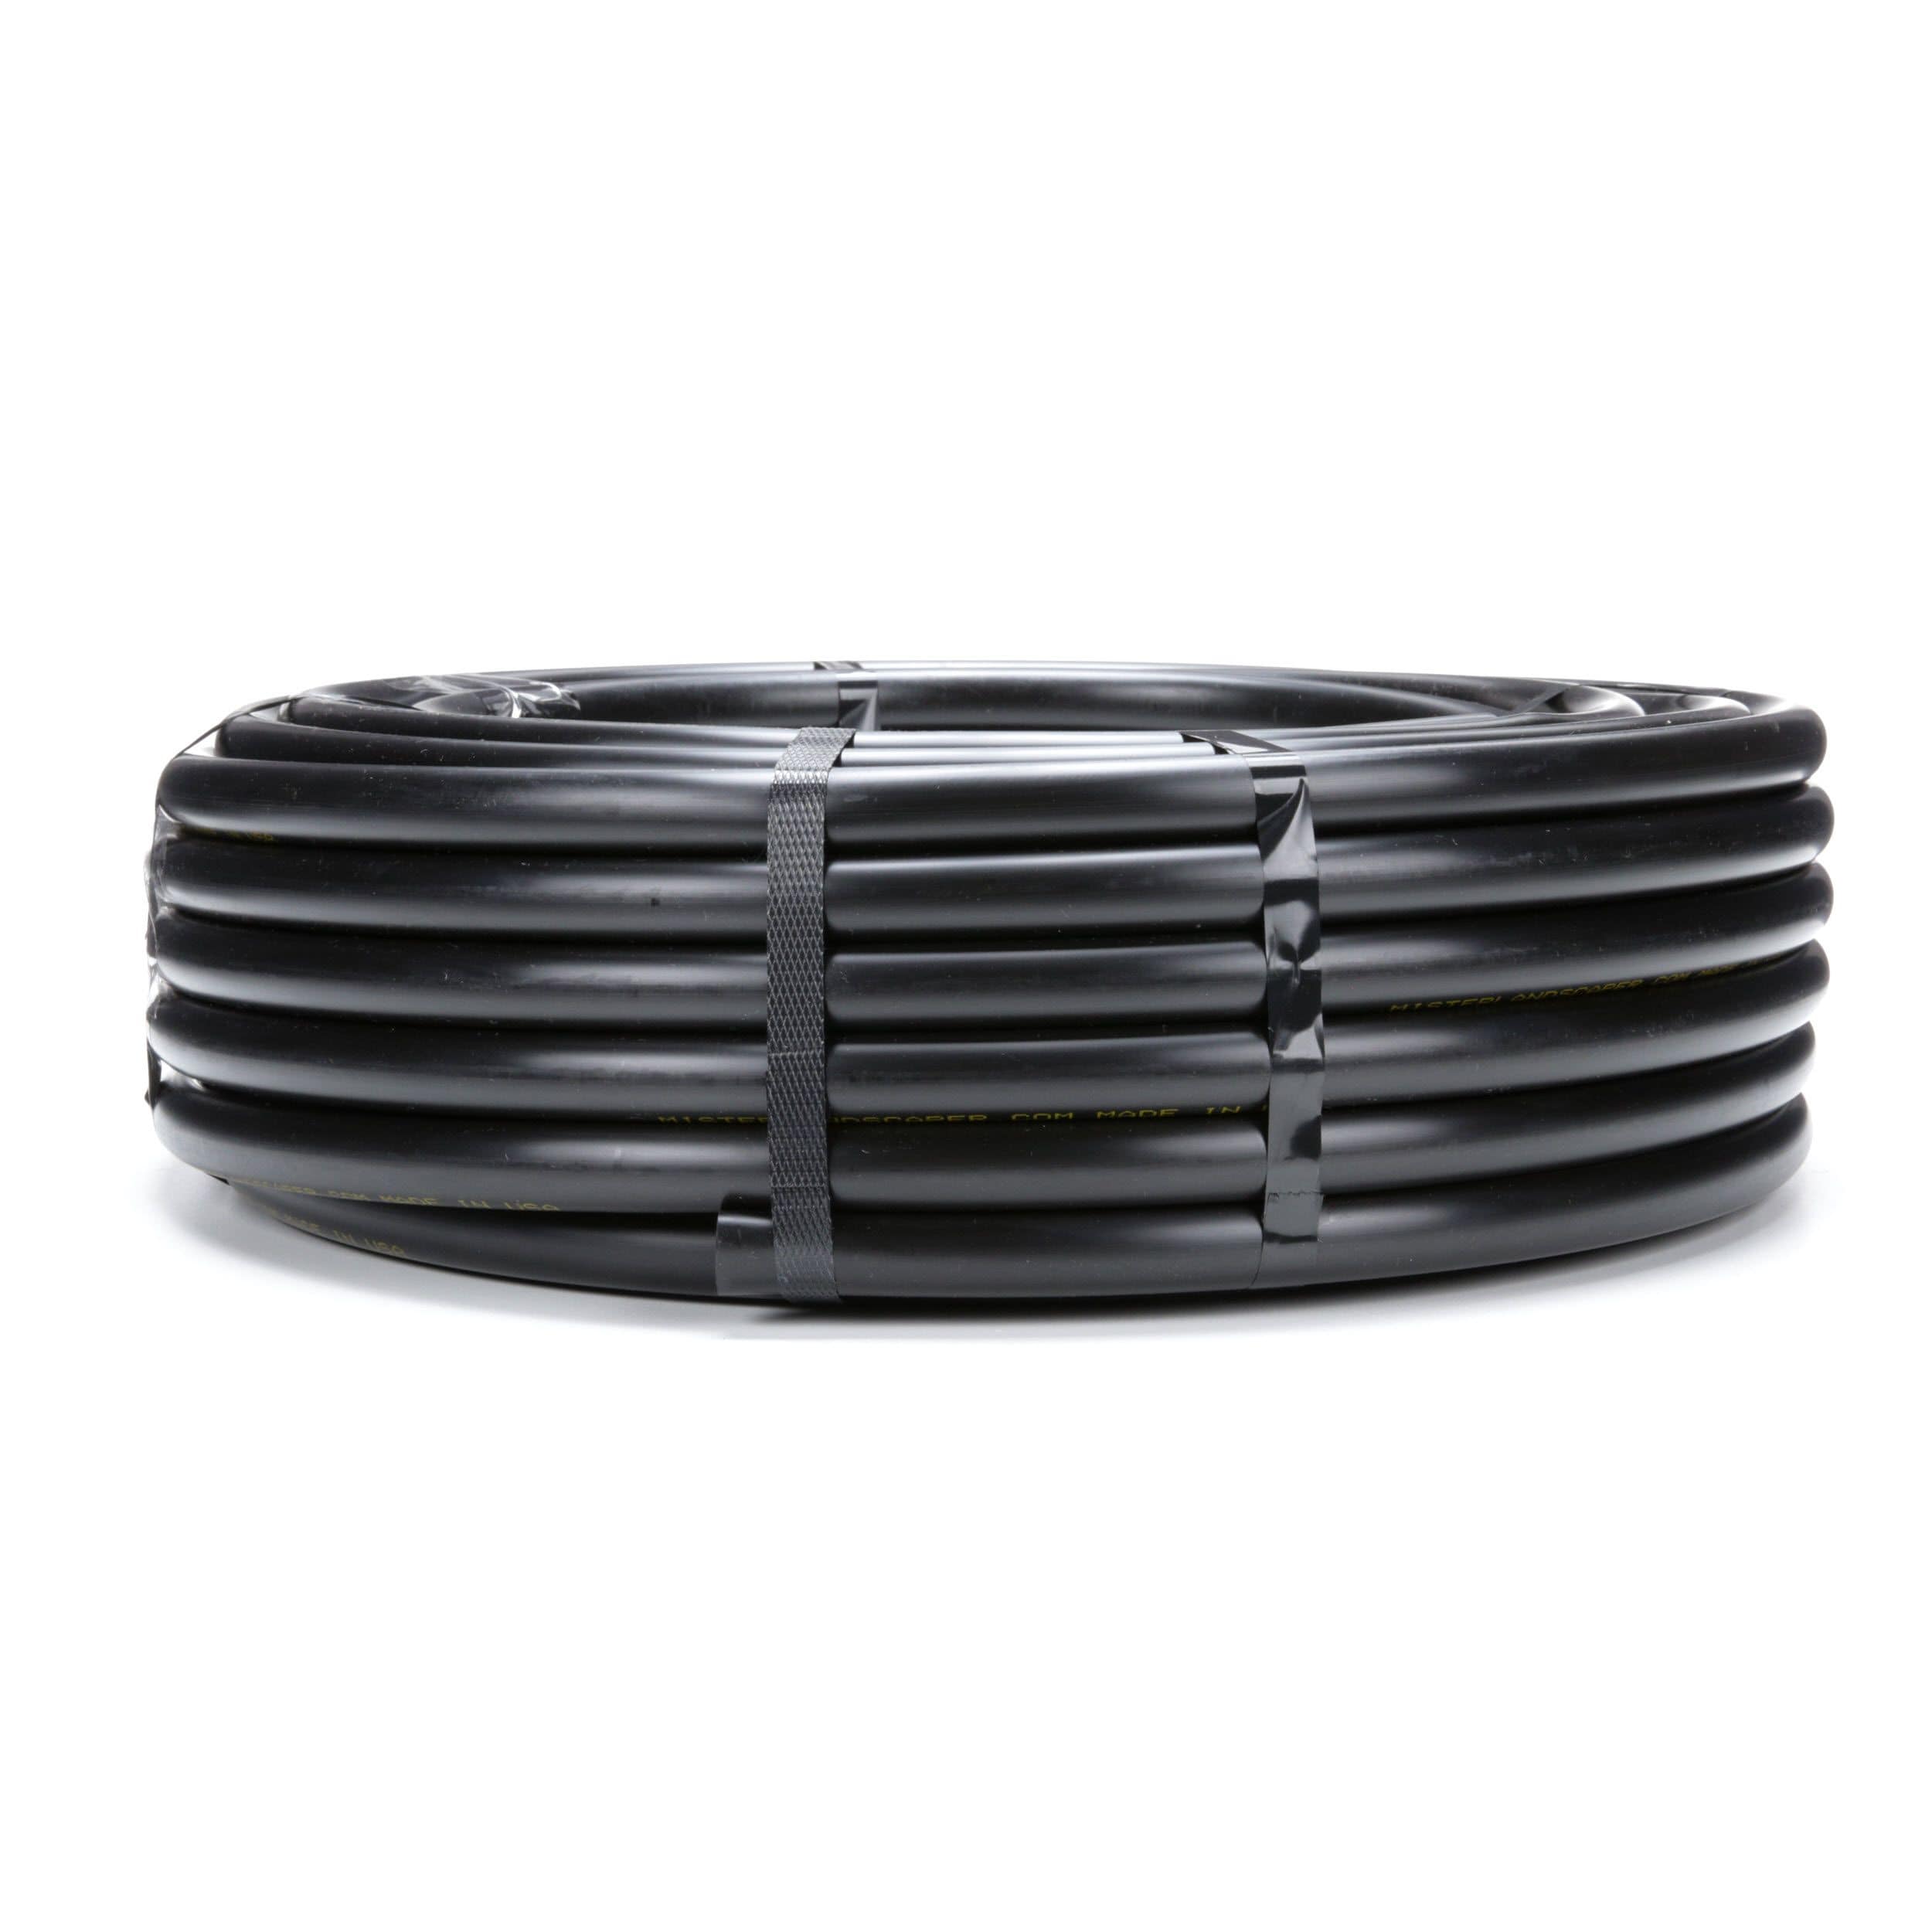 34 Inch Irrigation Tubing Lowes